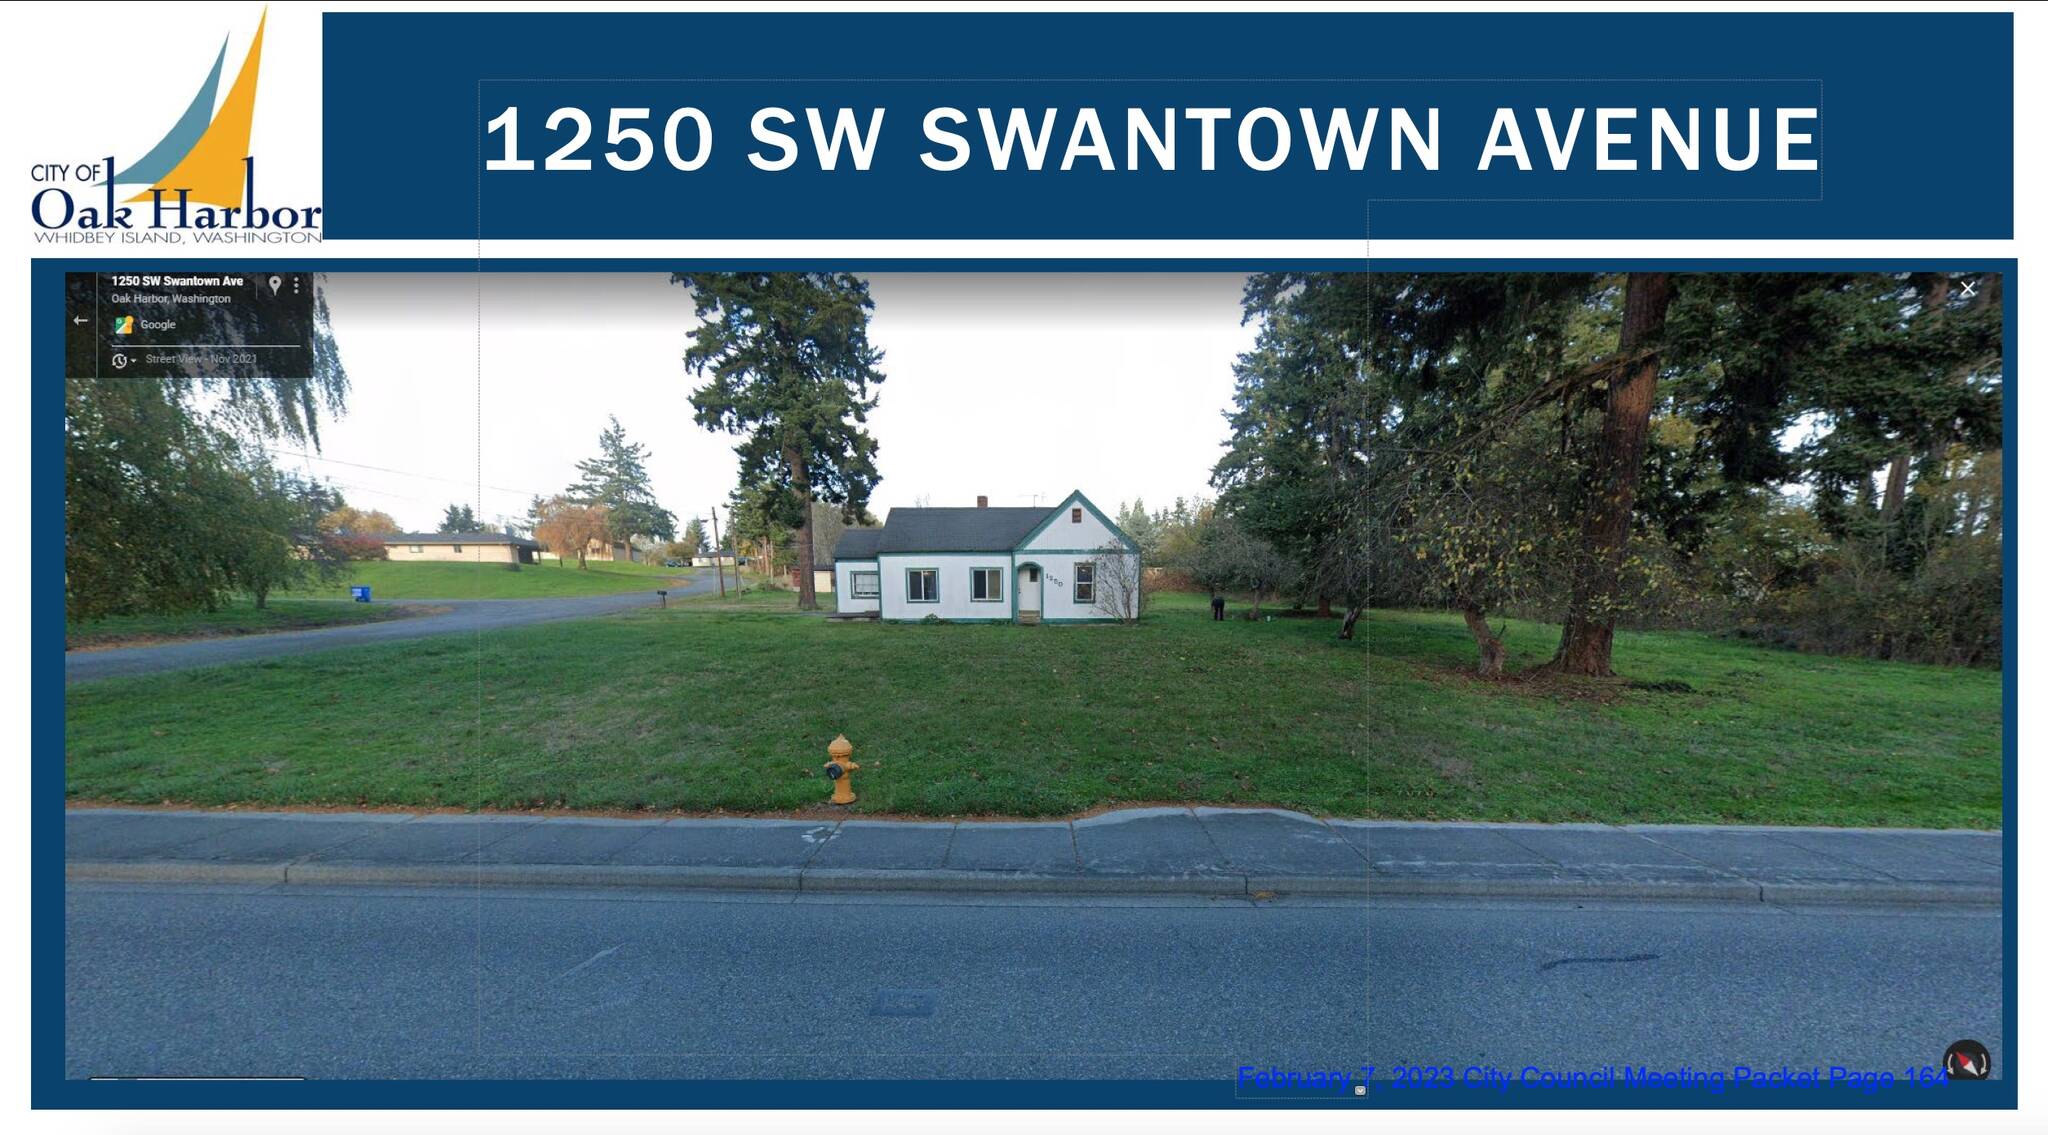 Oak Harbor City Council agreed to purchase 1250 SW Swantown Avenue to build a second fire station. (Photo provided)